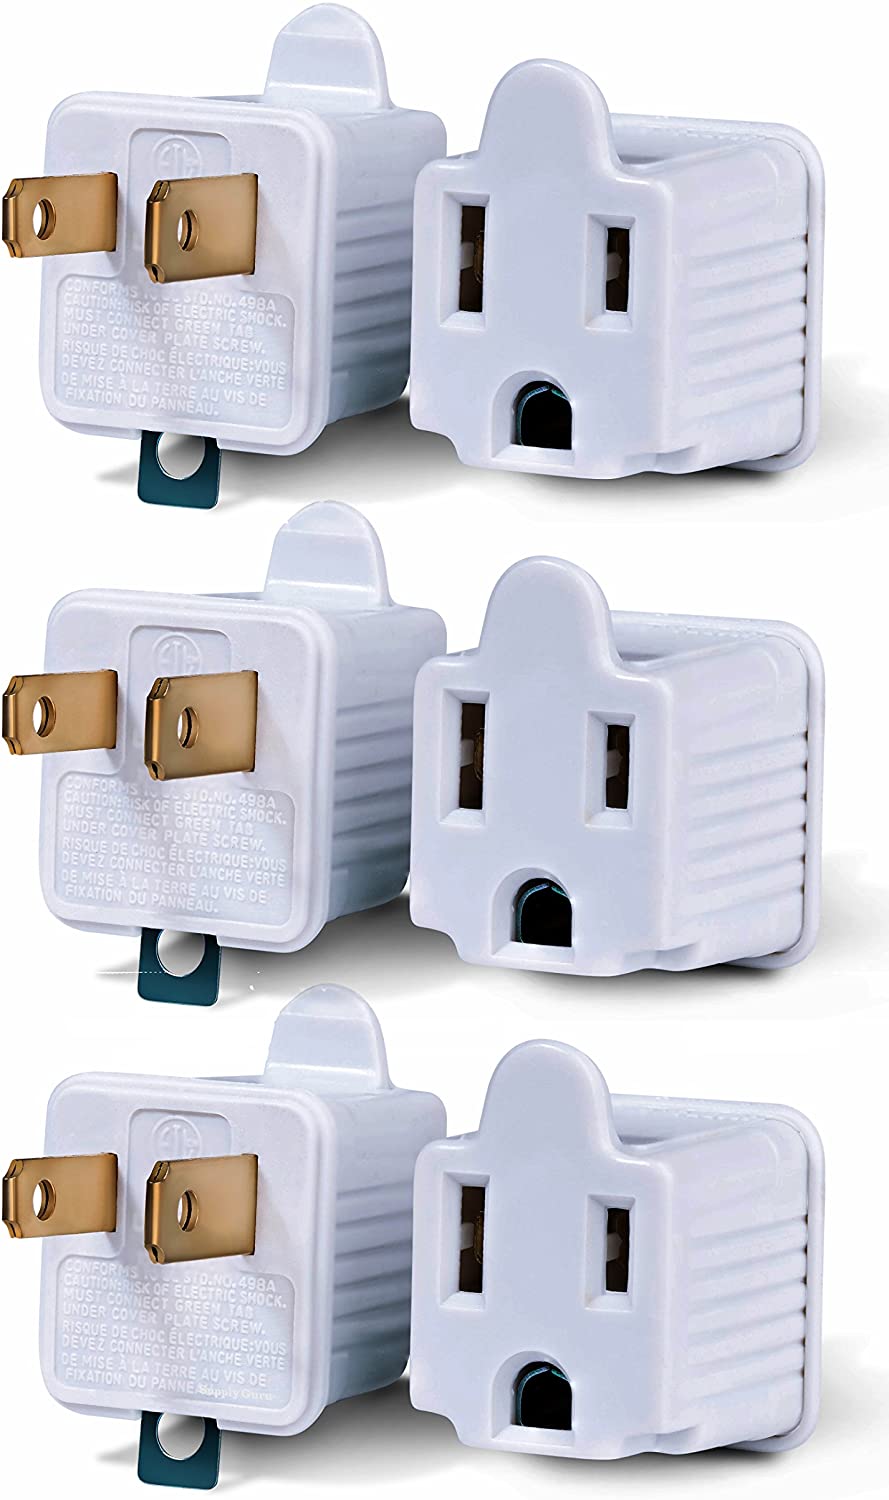 Supply Guru ETL Listed 3-To-2 Prong Plug Adapters, 6-Count